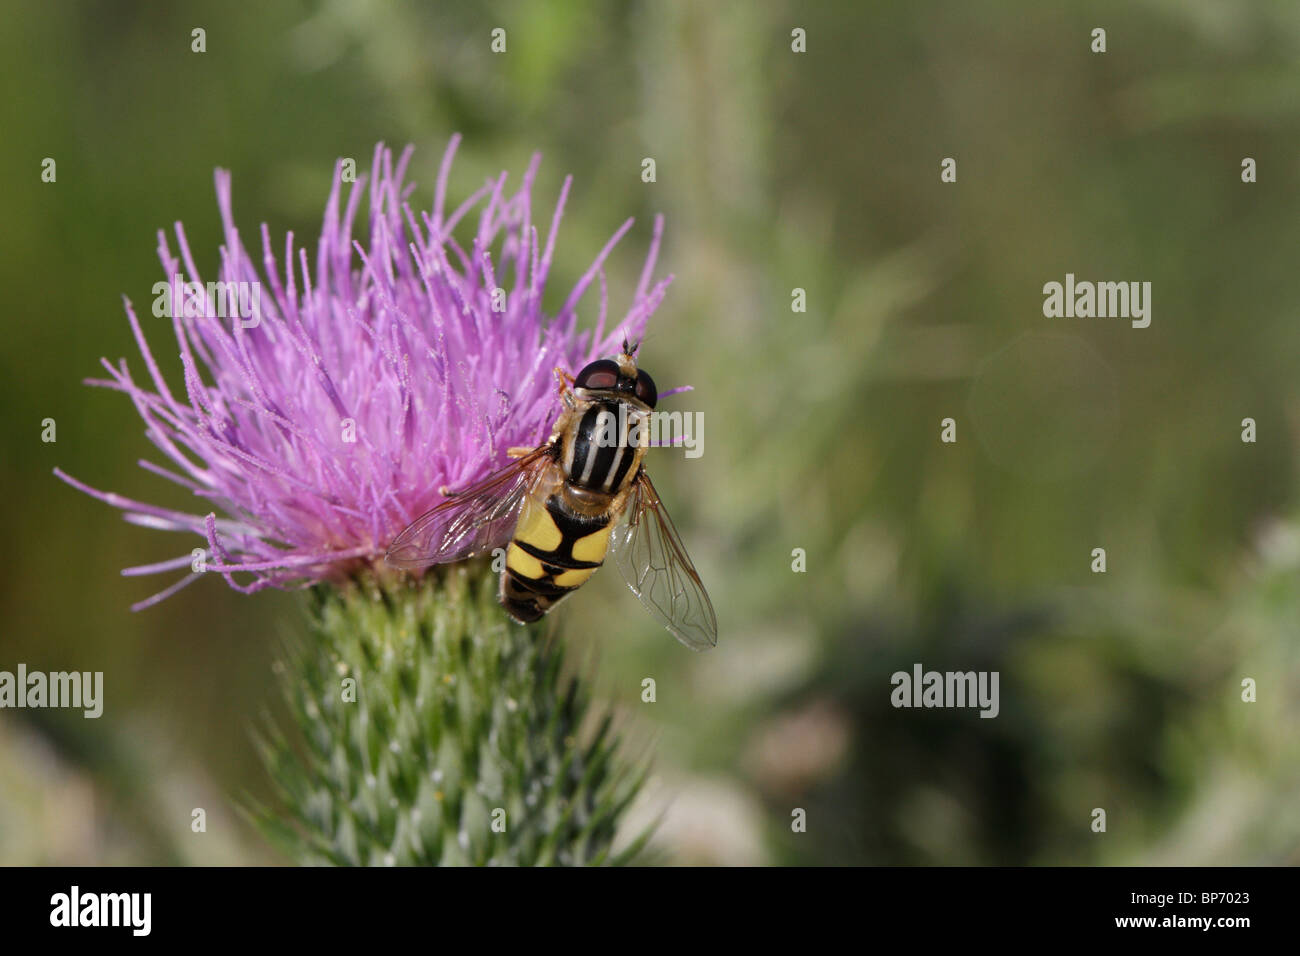 Helophilus trivittatus, a hover fly, on a thistle Stock Photo